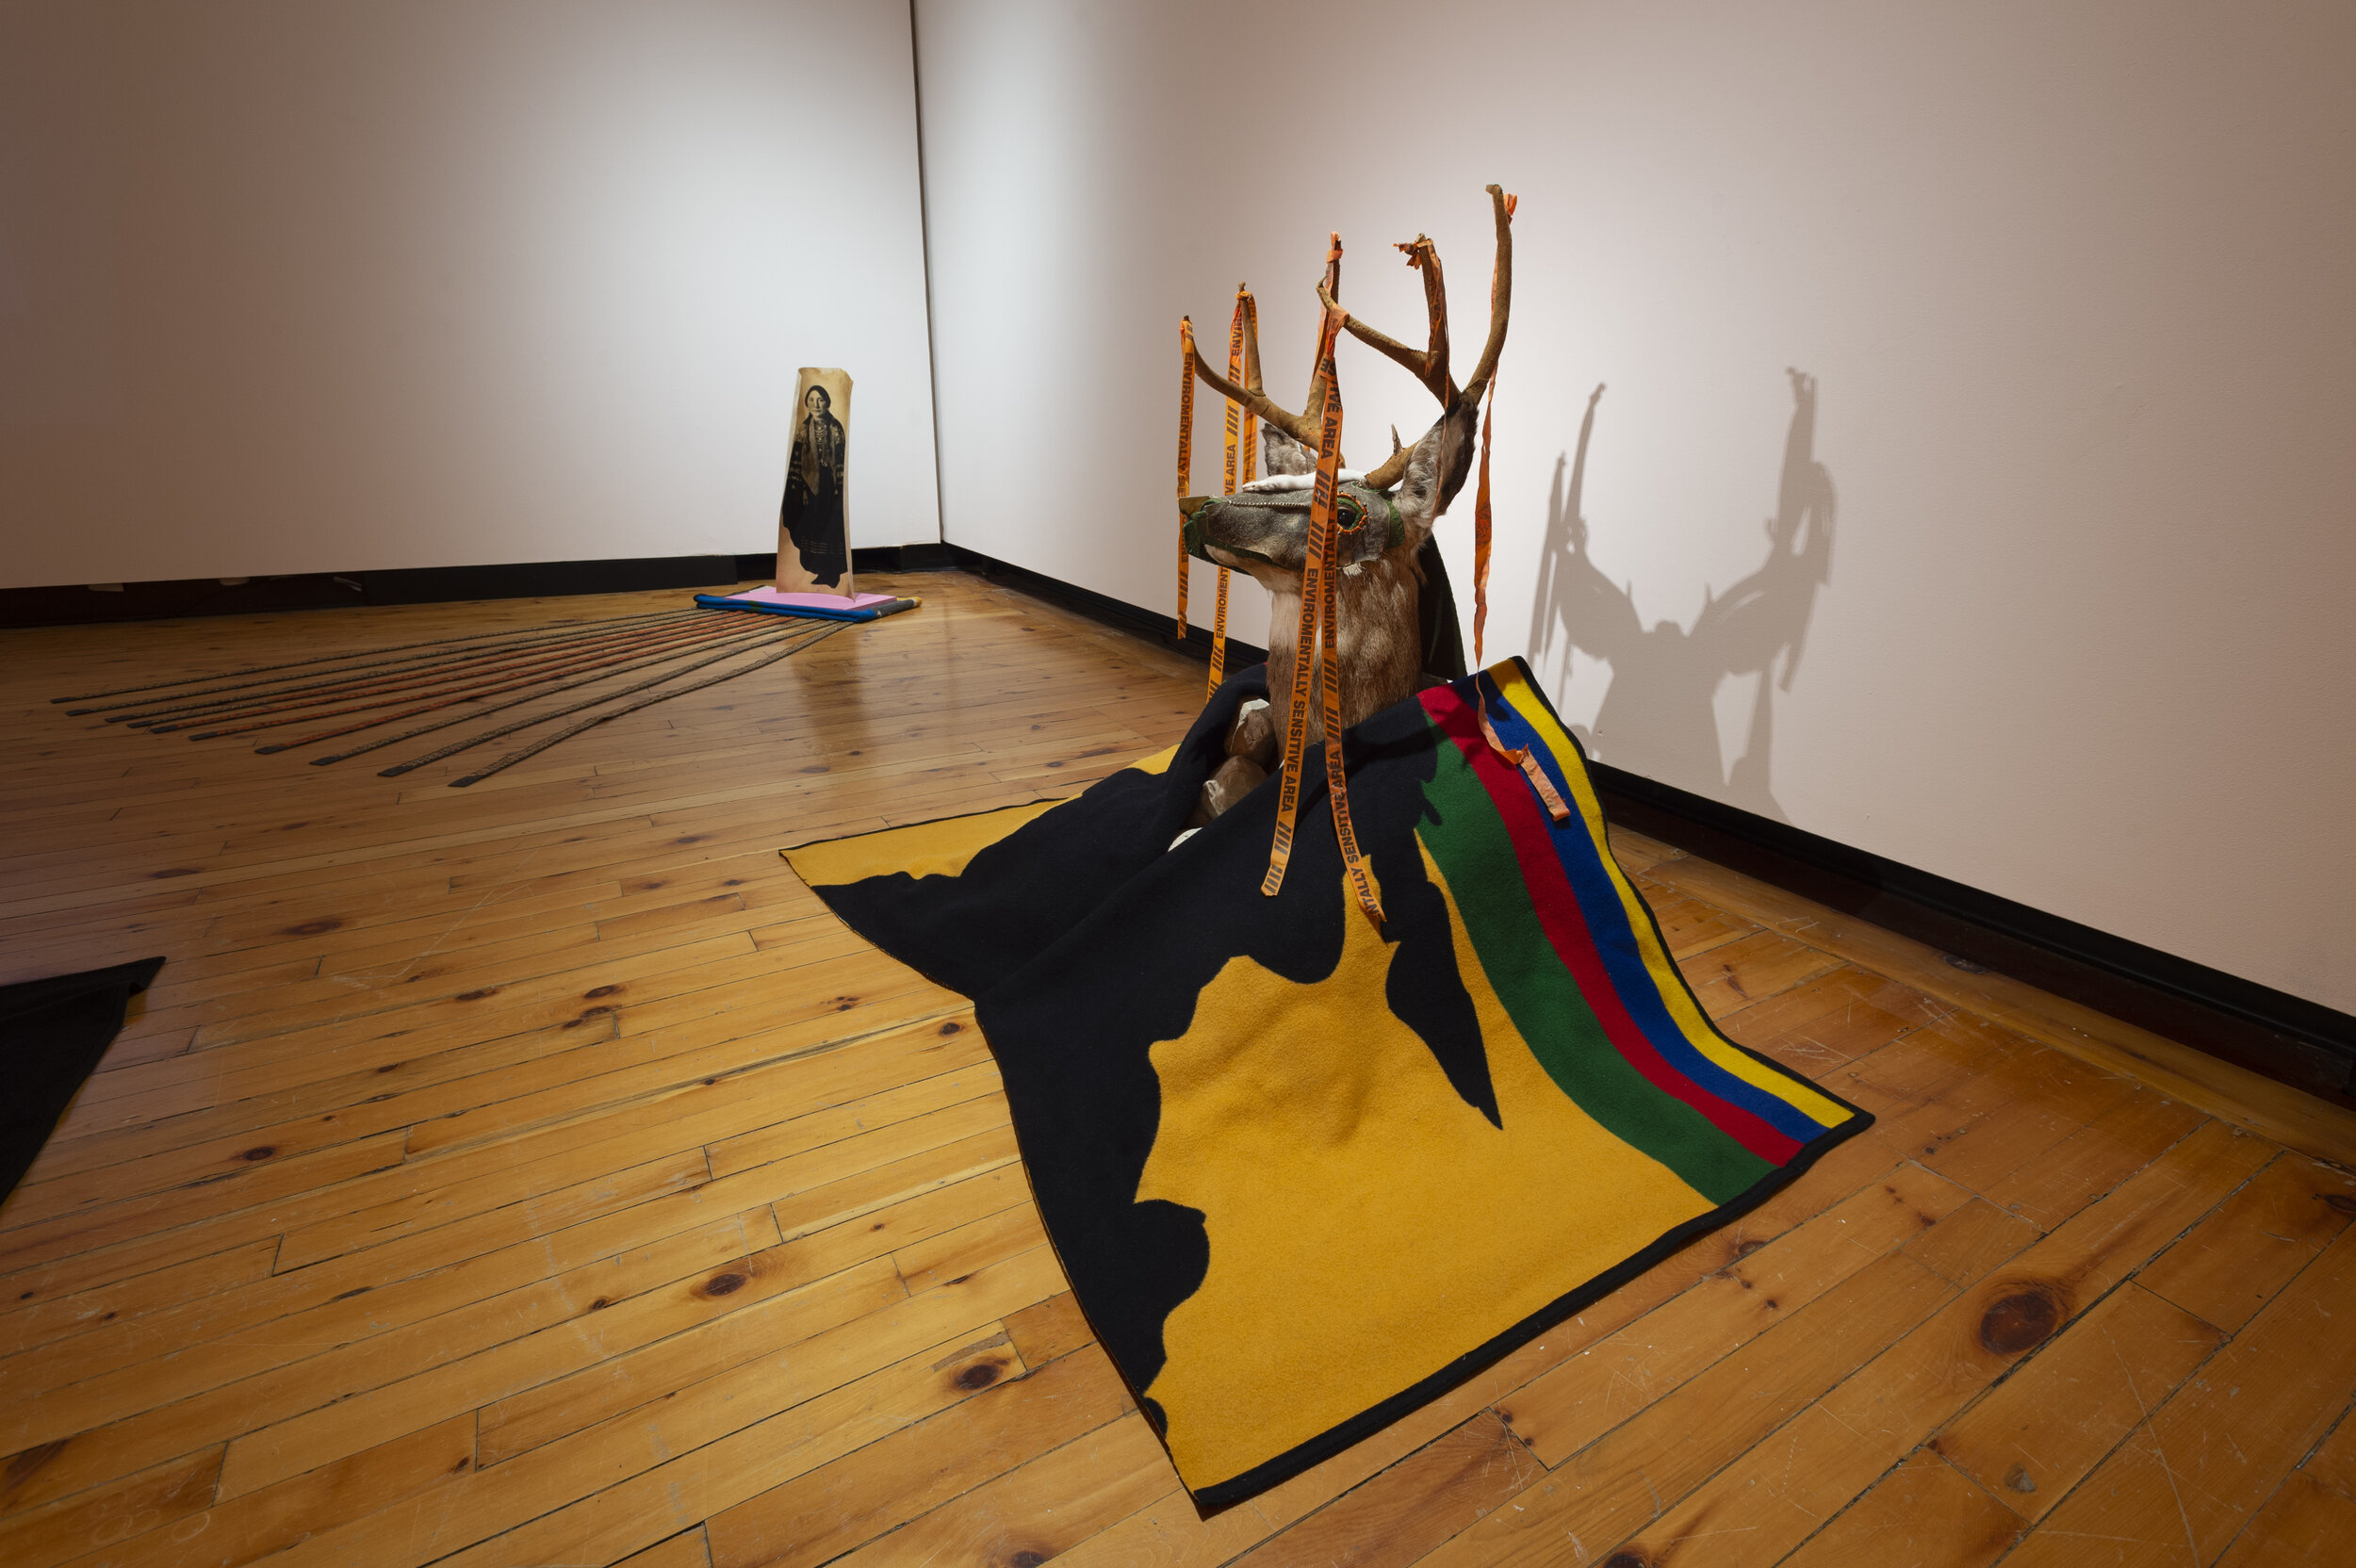 L: Glenna Cardinal and seth cardinal dodginghorse, Winnie, Ina Series, 2019.  R: Glenna Cardinal, mourning home 2019. Image courtesy of the Art Gallery of Guelph.